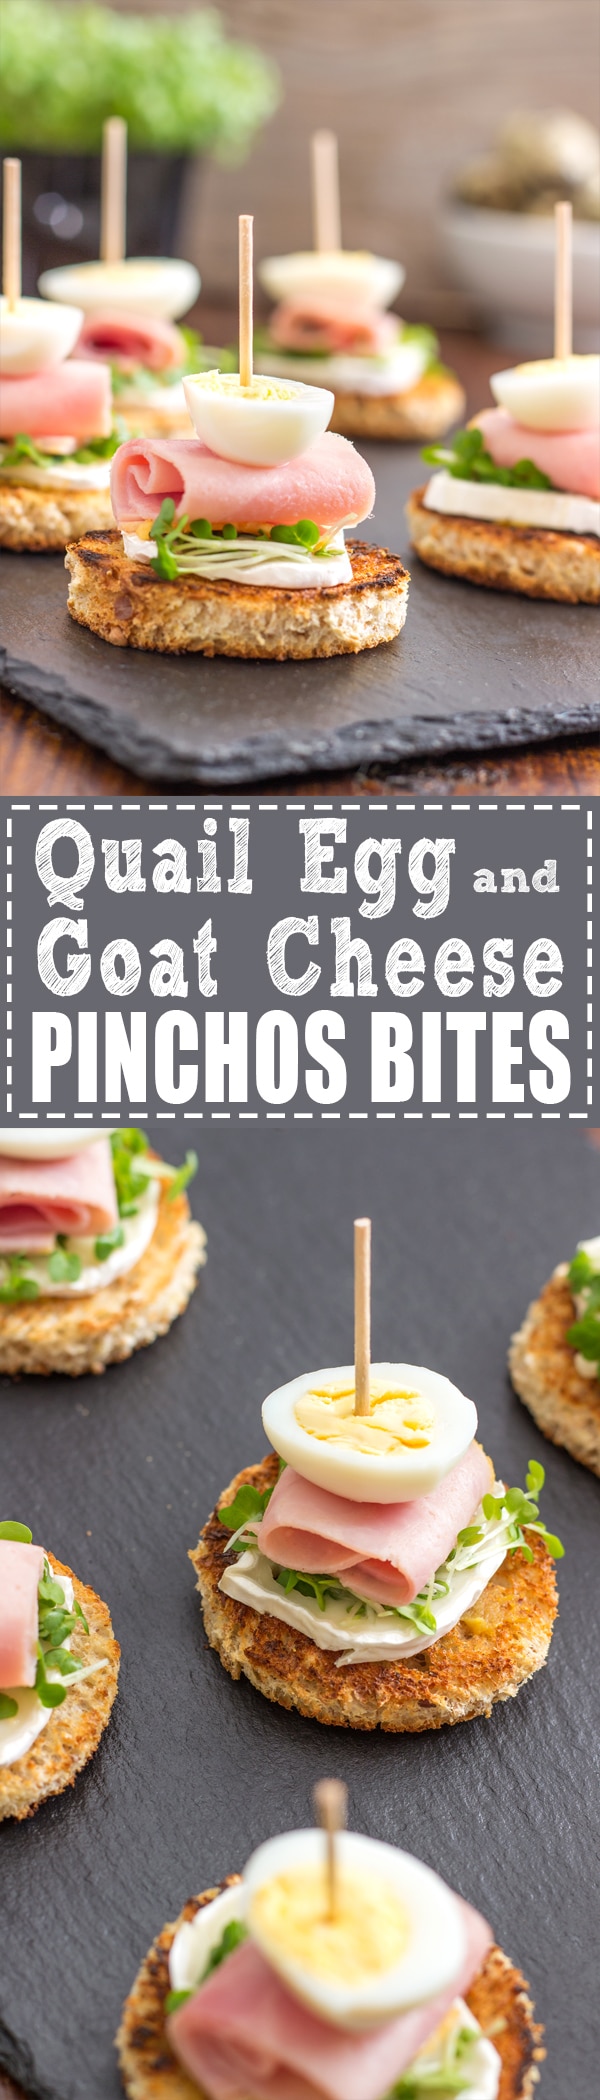 These bite size Quail Egg and Goat Cheese Pinchos Bites are perfect for parties or family gatherings! A pincho is a very popular small snack in Spain | happyfoodstube.com